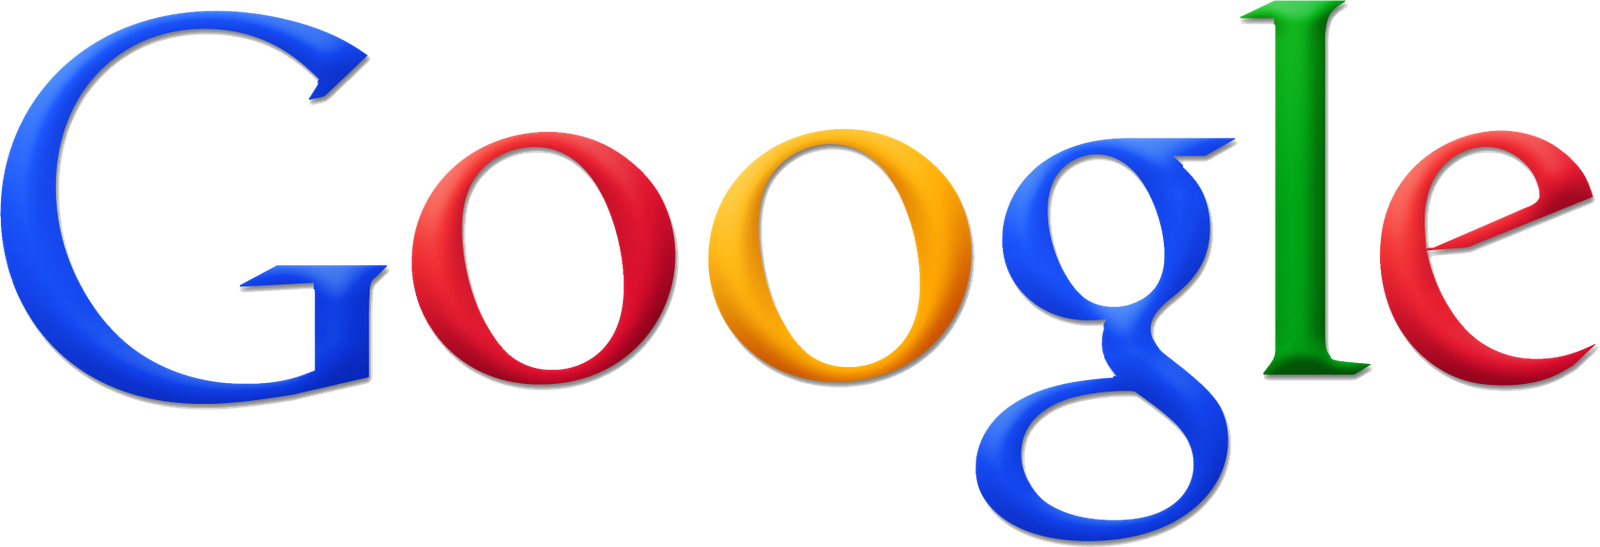 google search bar png download